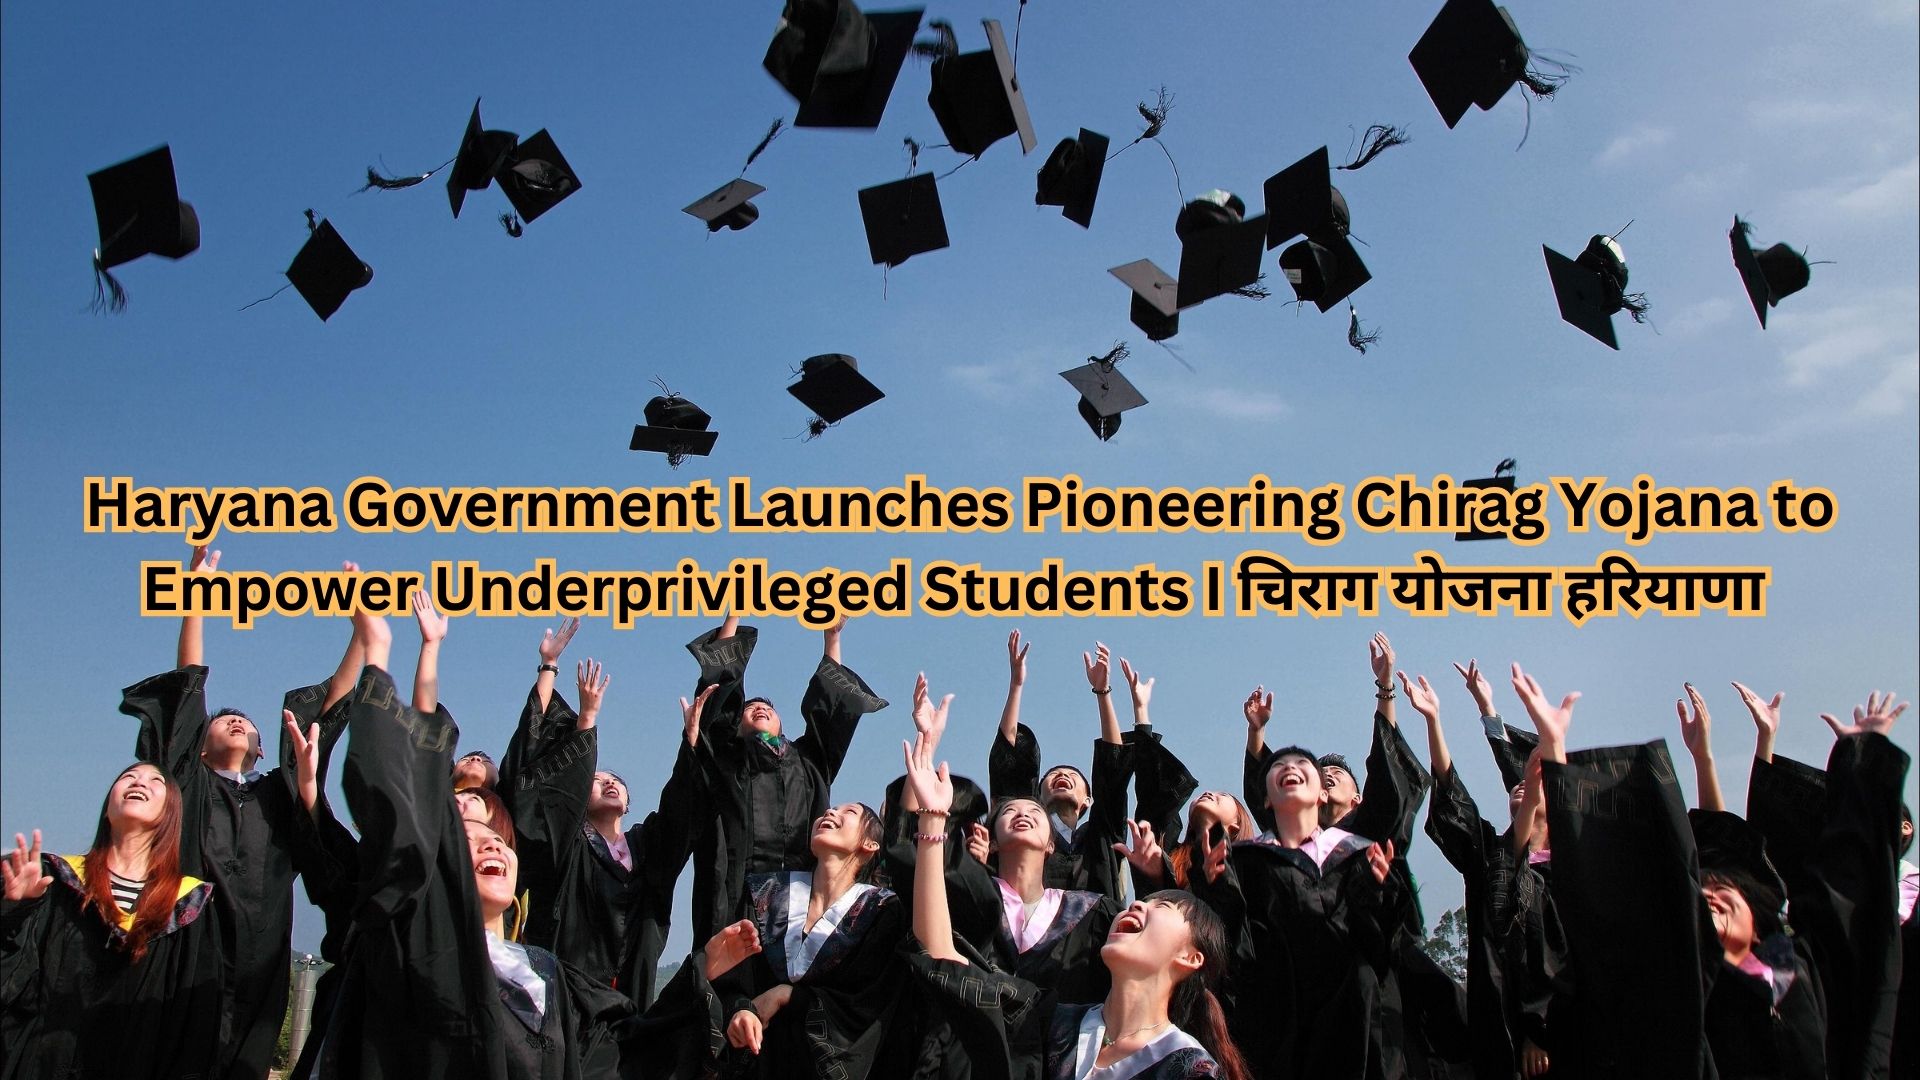 Haryana Government Launches Pioneering Chirag Yojana to Empower Underprivileged Students I चिराग योजना हरियाणा